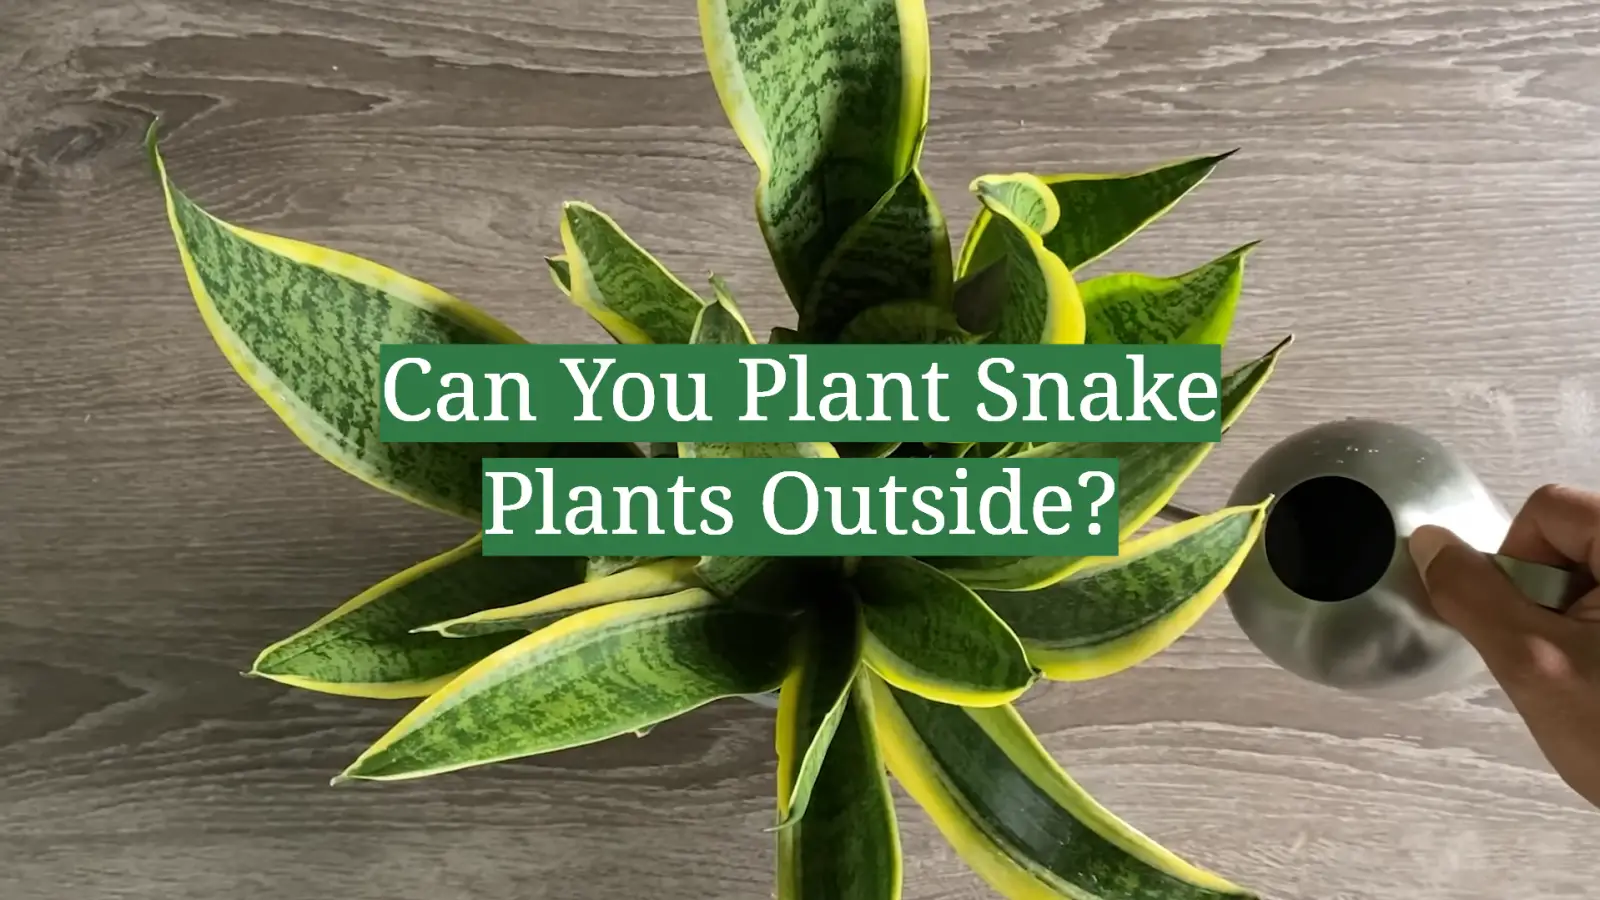 Can You Plant Snake Plants Outside?